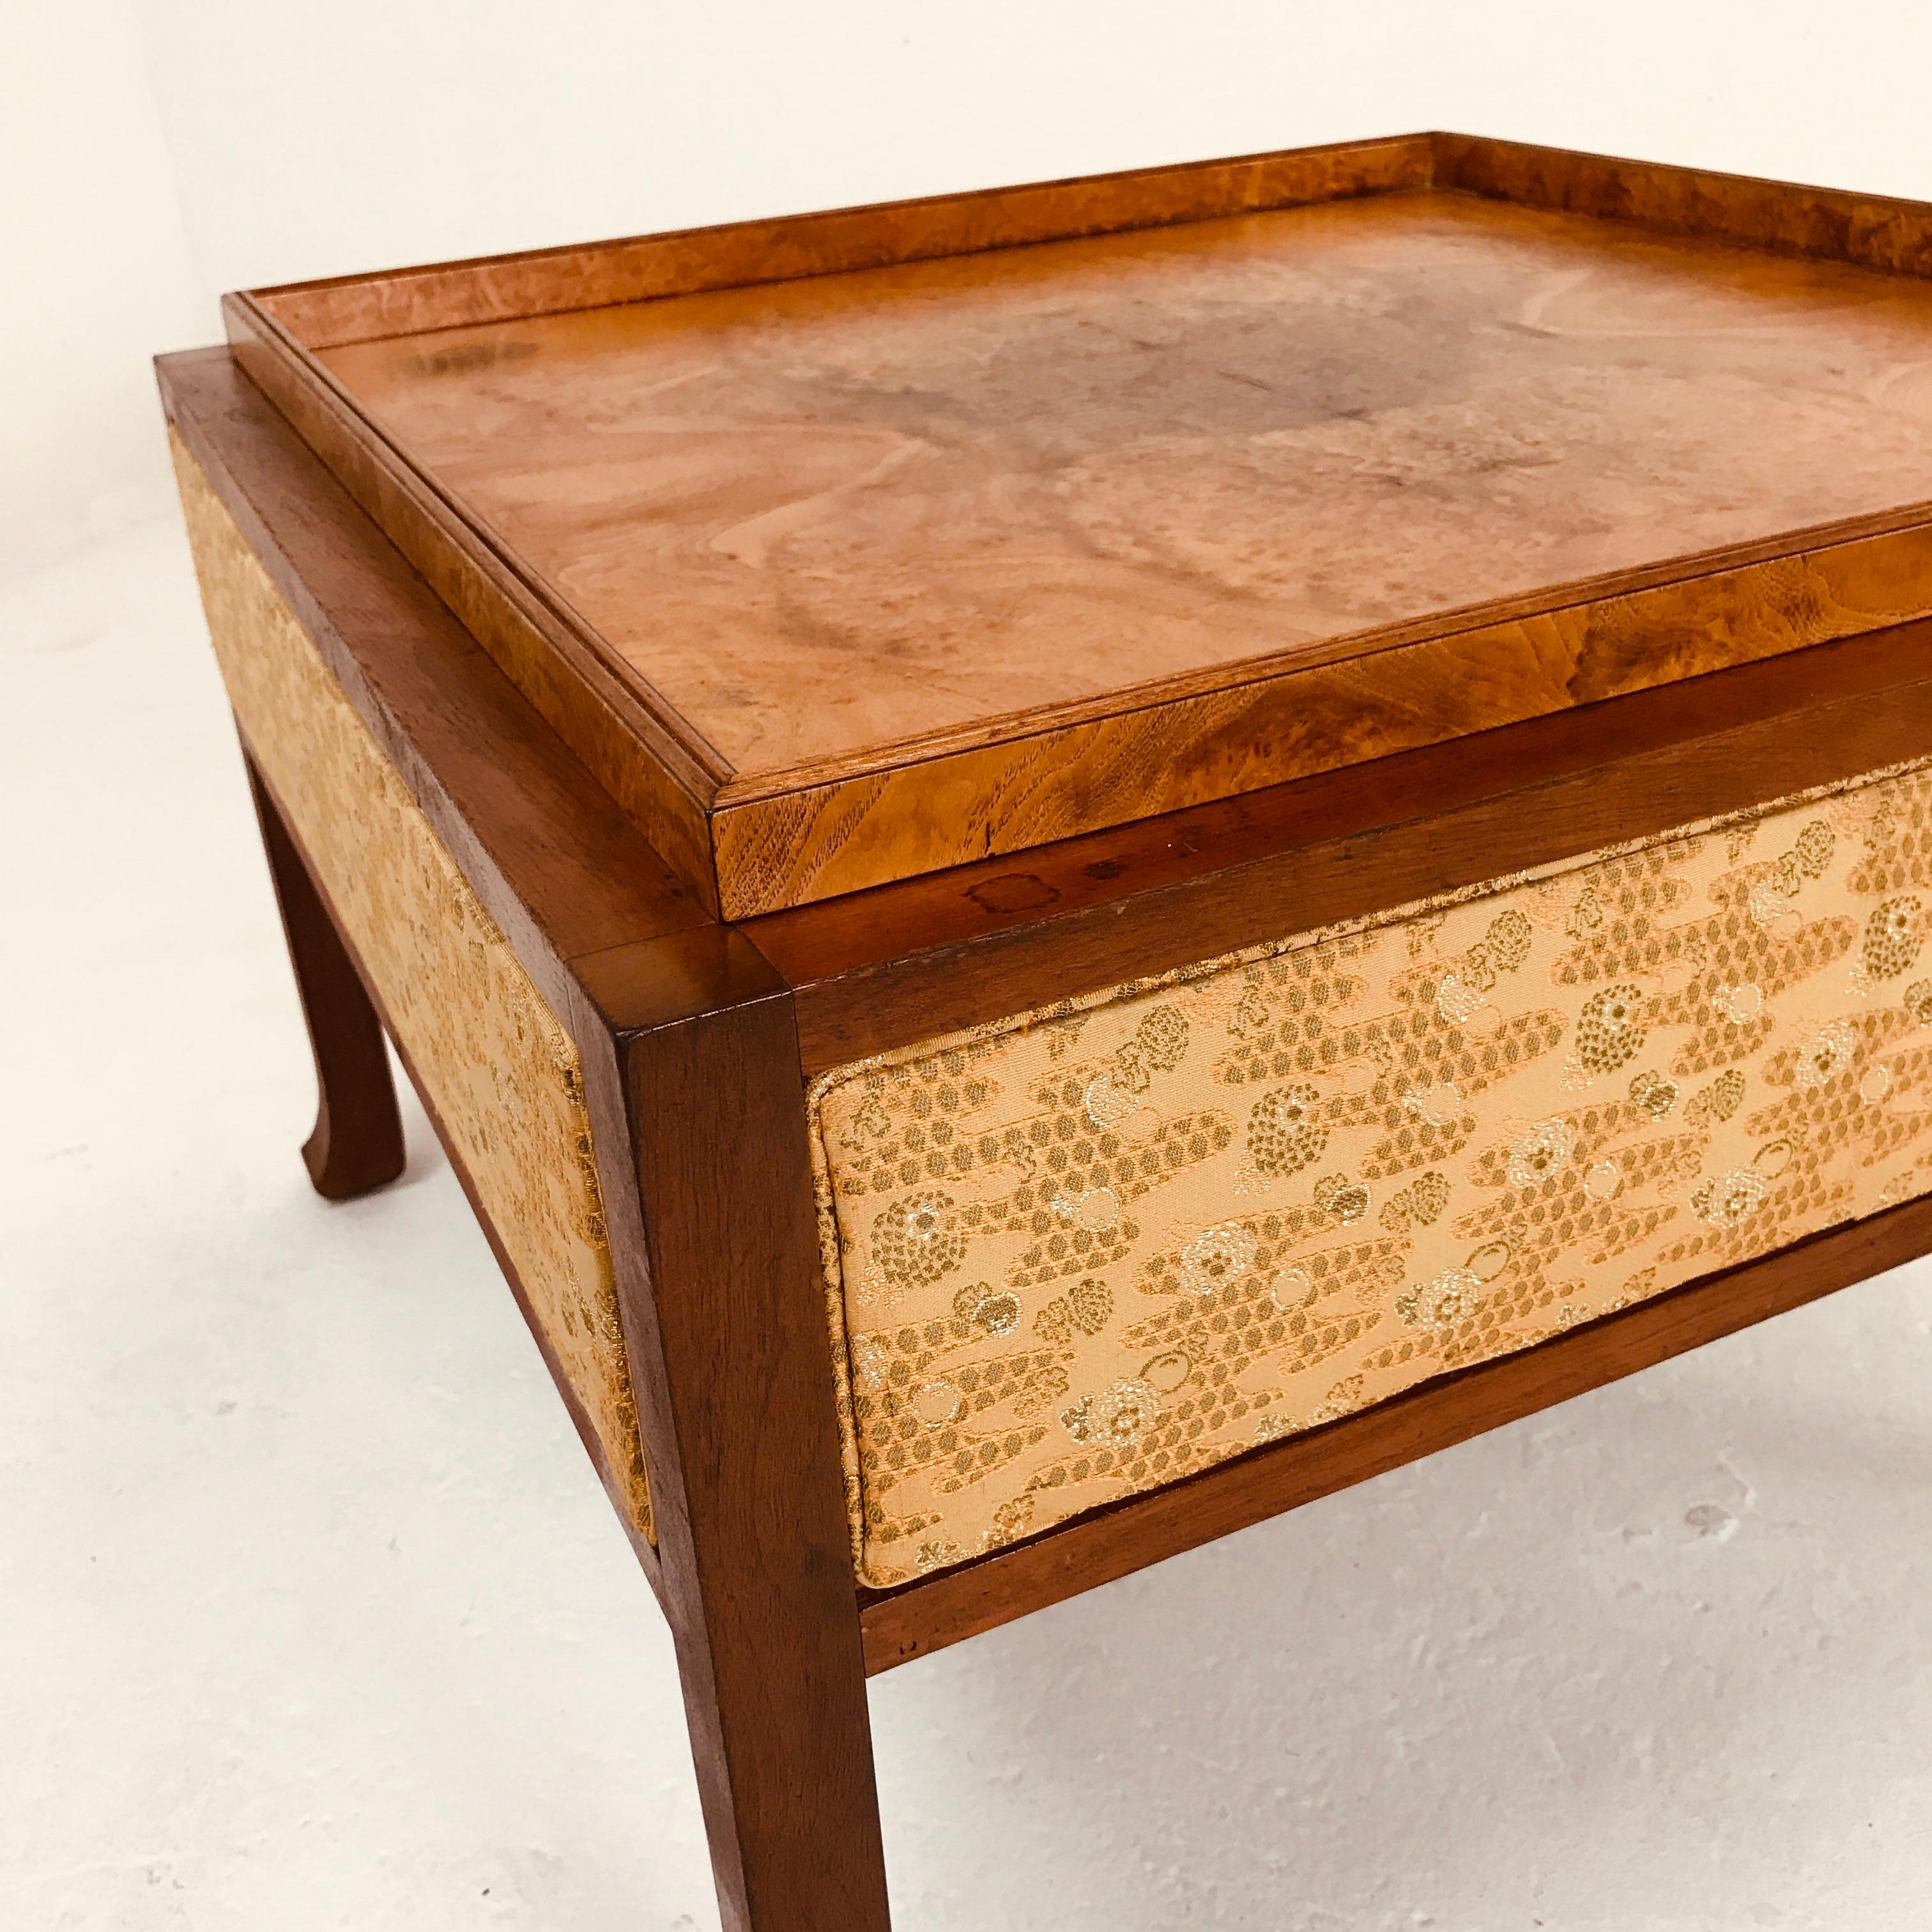 Fabulous baker furniture butler table with removable tray top. Operating for over a century, baker furniture is one of the rare brands that have garnered an irrevocable place within the canon of American design and craftsmanship.